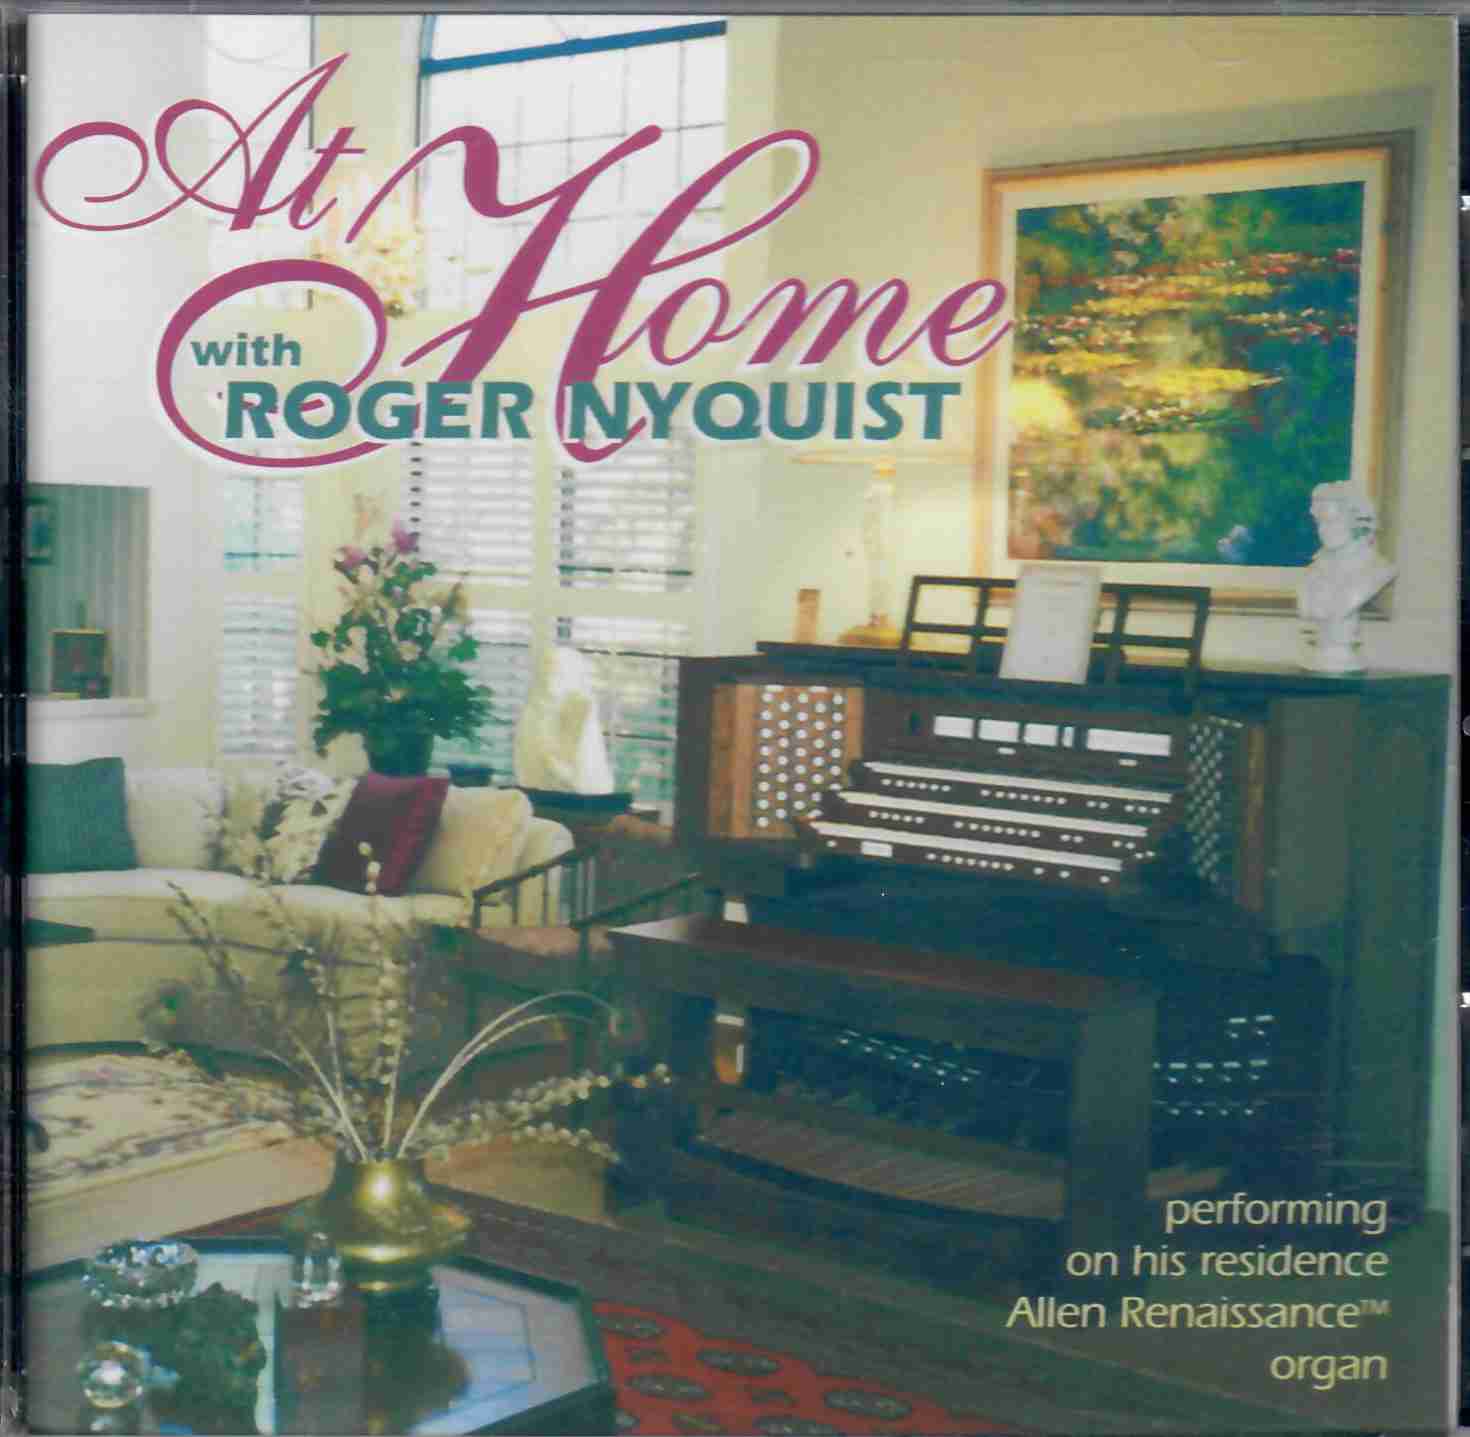 At Home with Roger Nyquist.